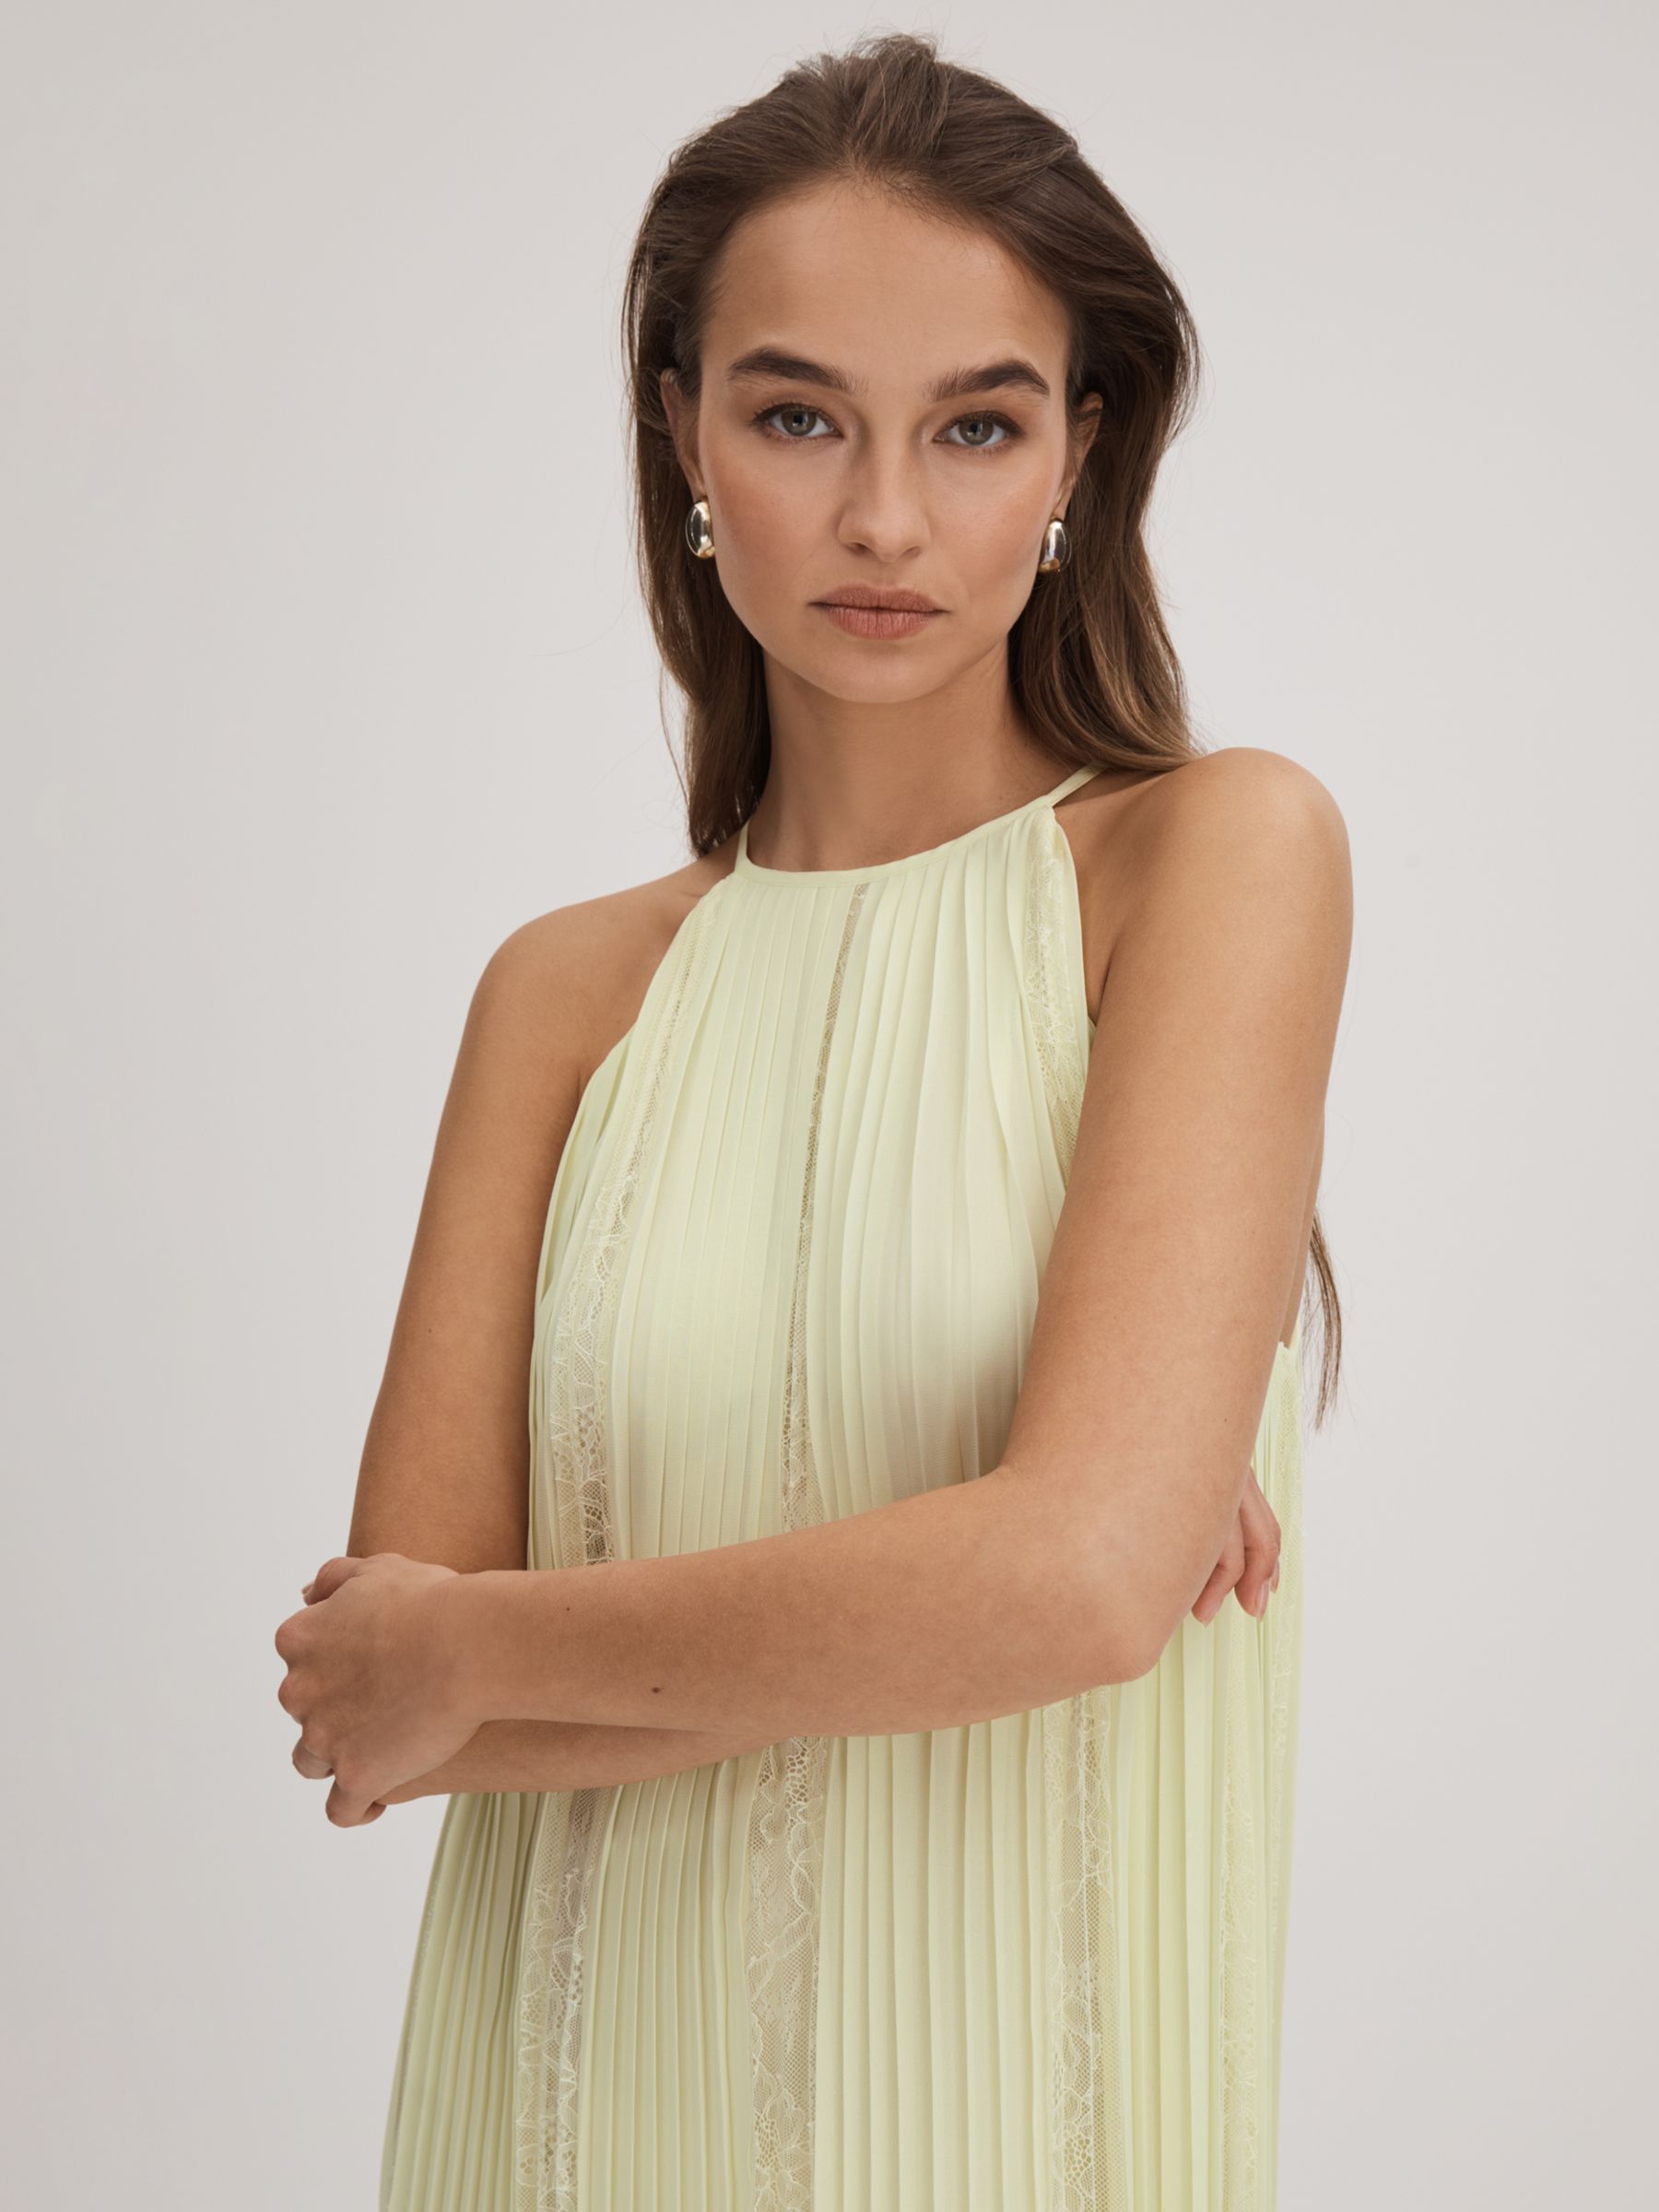 FLORERE Pleated Lace Panel Maxi Dress, Pale Green, 16